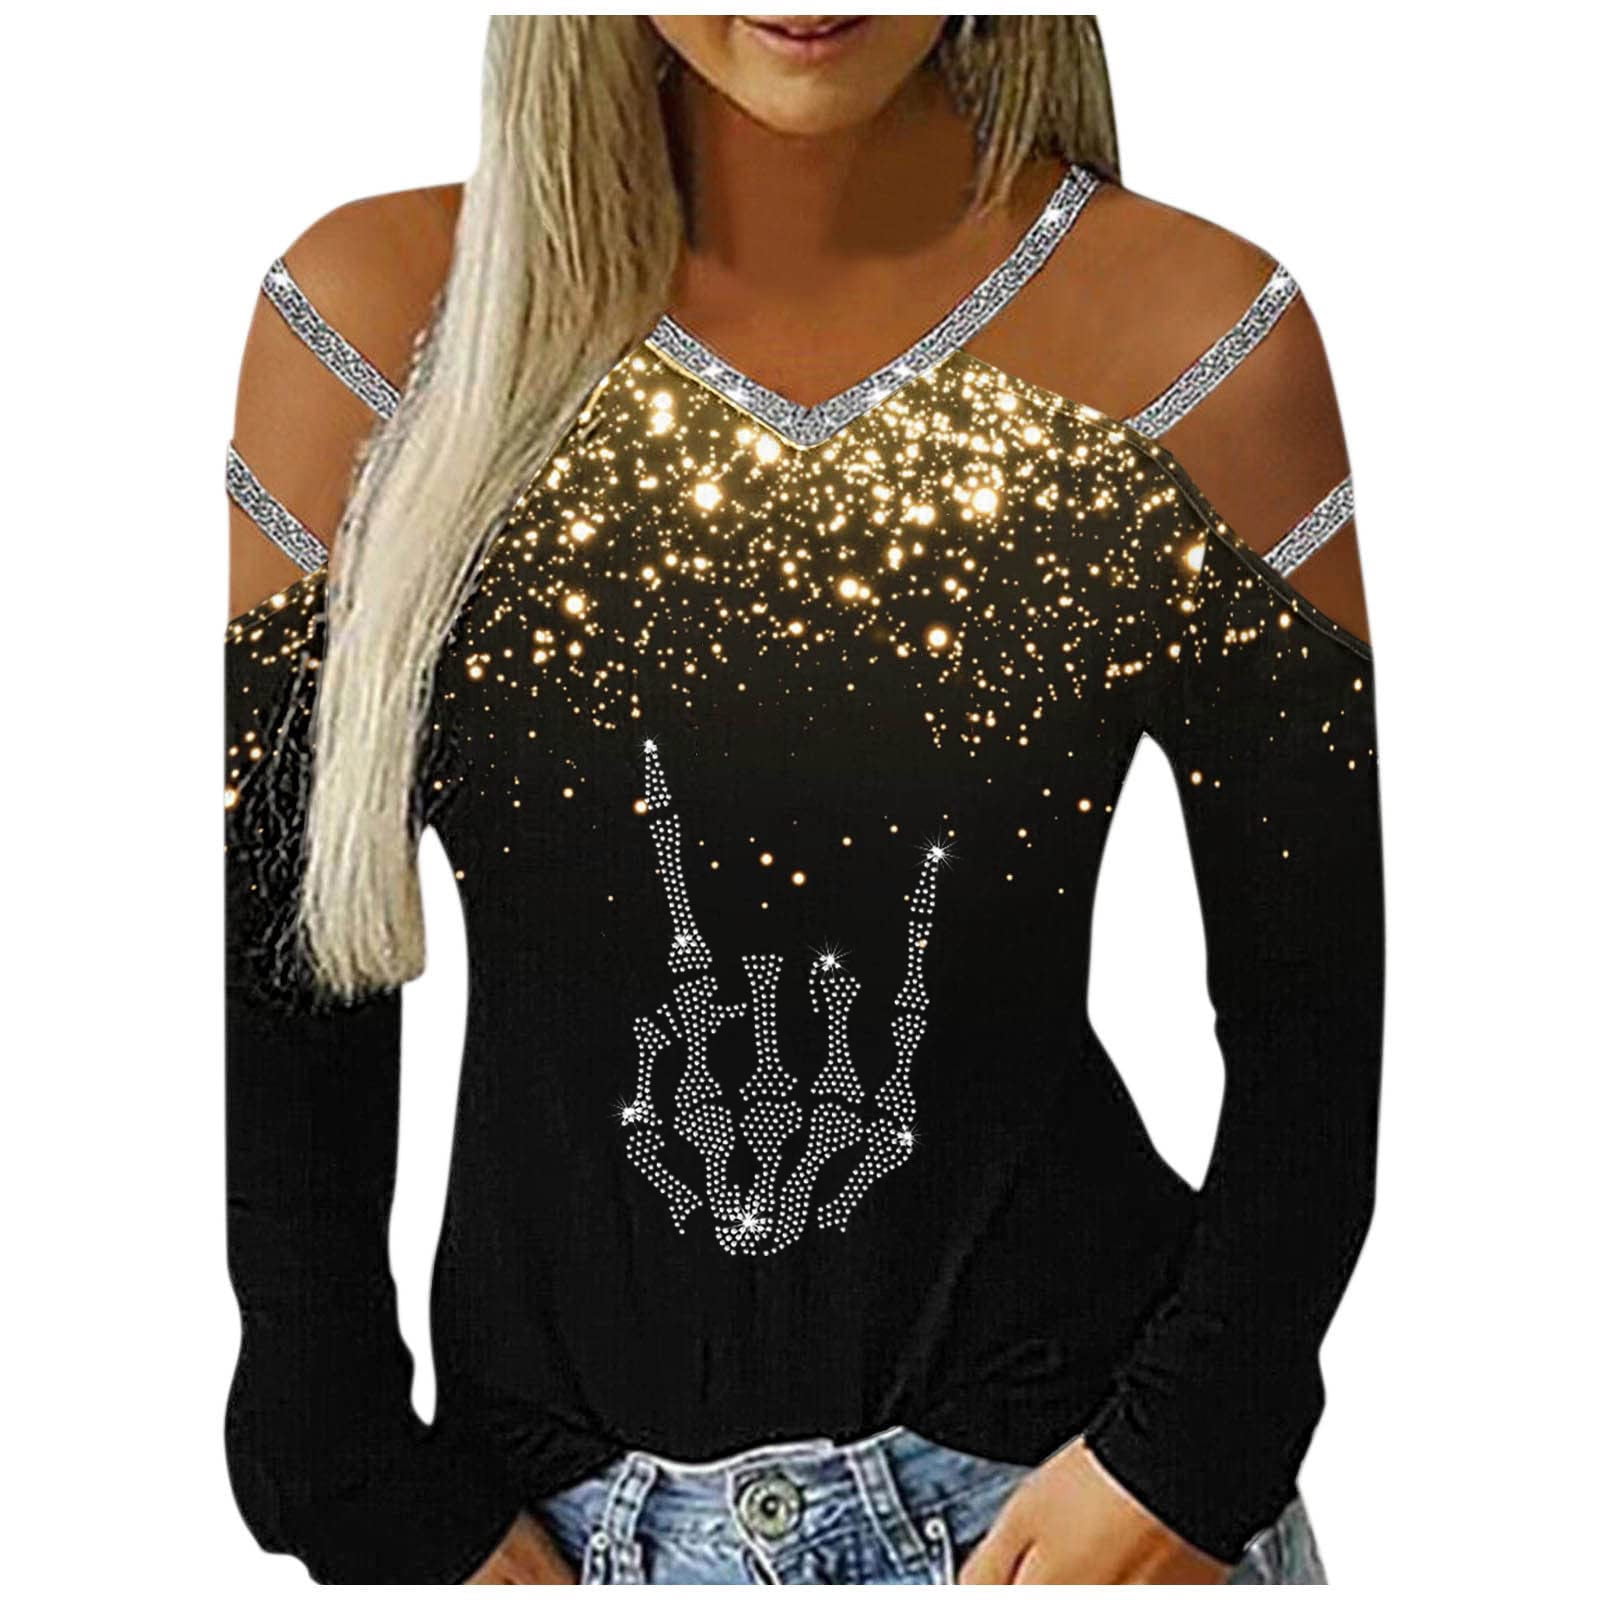 Women Rhinestone Hollow Out Long Sleeve T Shirt Ladies Crew Neck Blouse Tops Tee